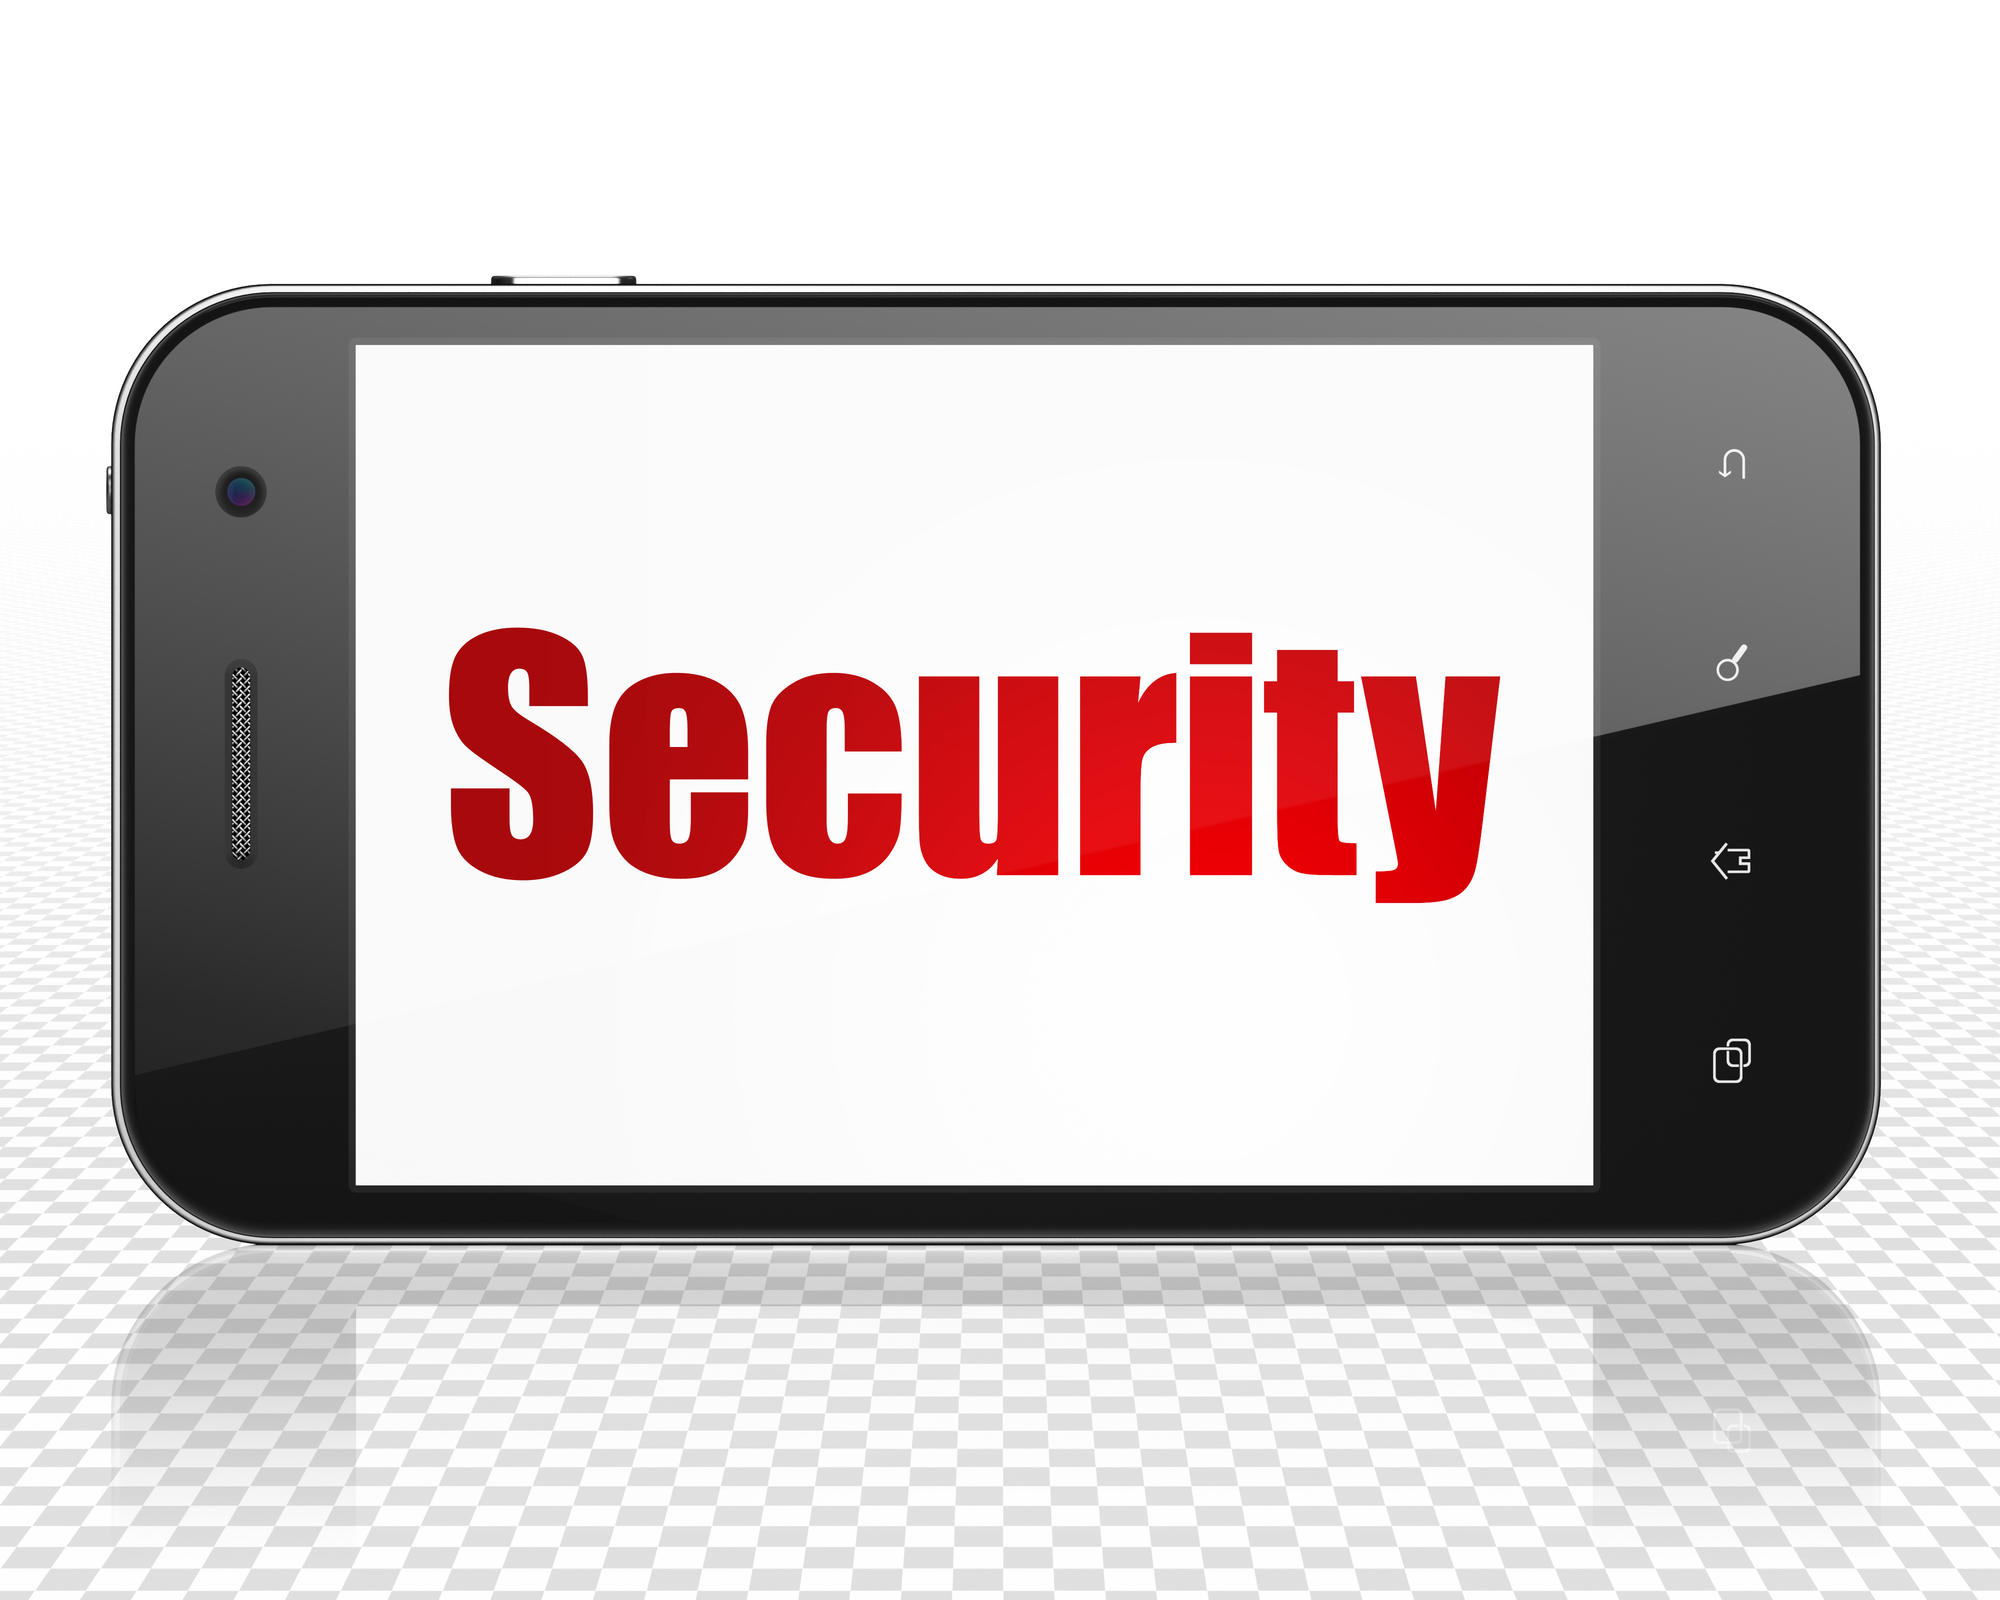 Protection concept: Smartphone with red text Security on display